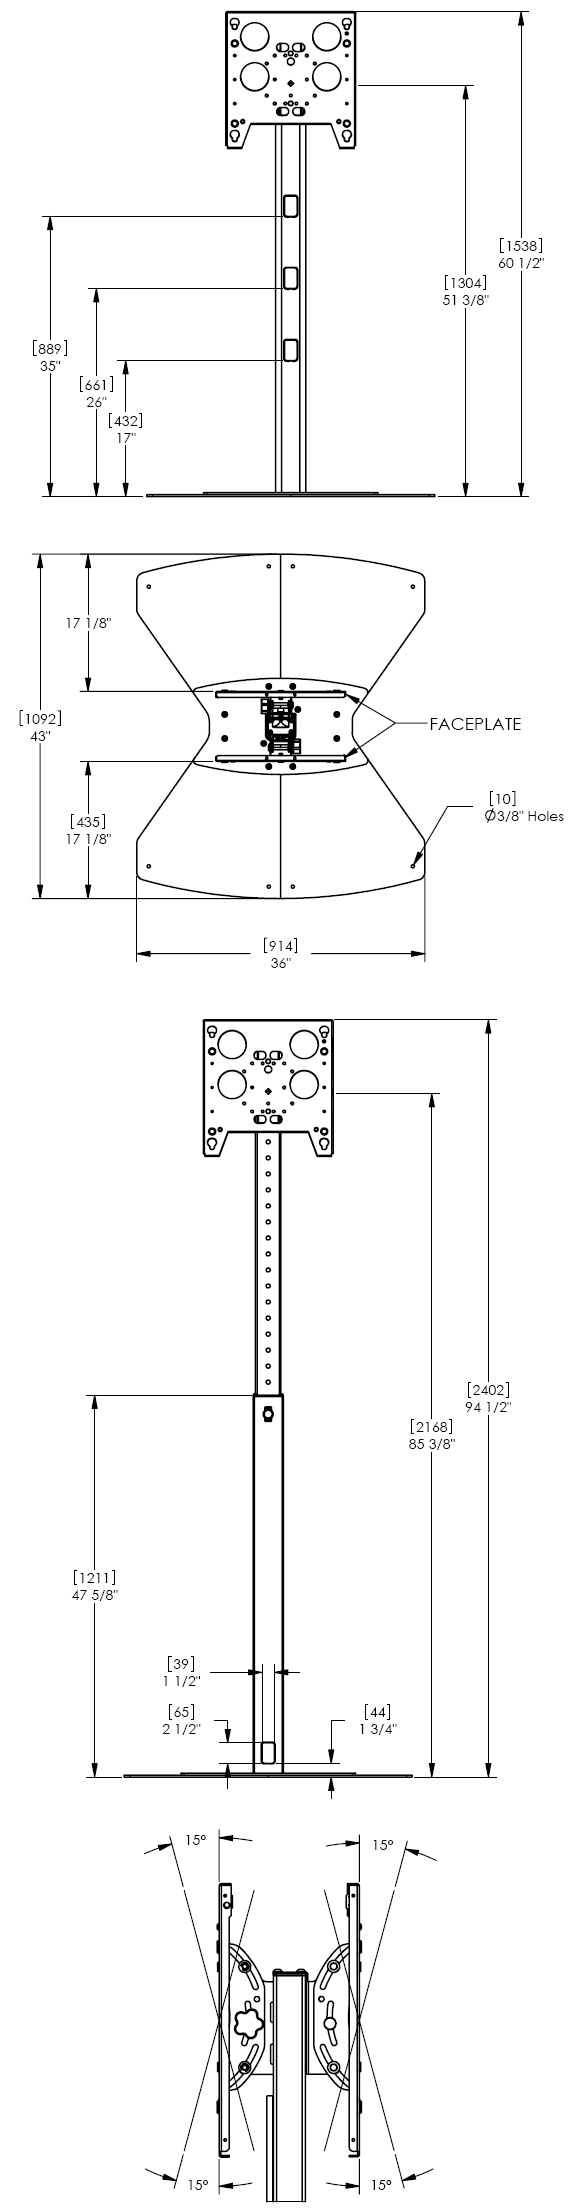 Technical Drawing for Chief PF2UB or PF2US Flat Panel Dual Display Floor Stand